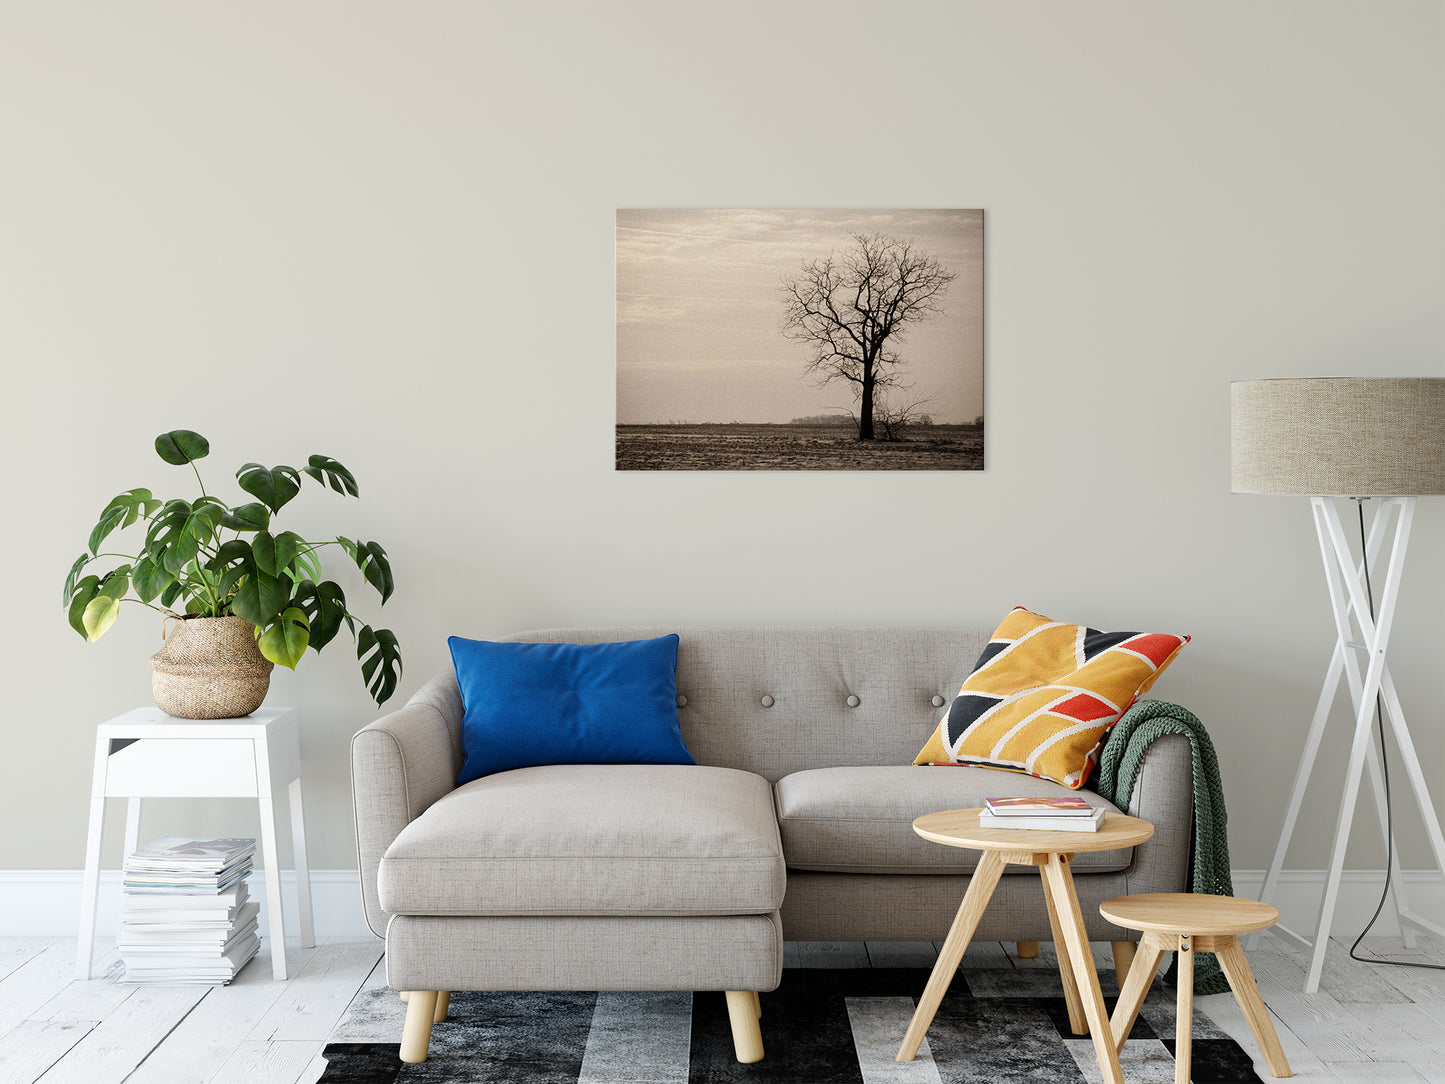 Lonely Tree in Black and White Rural Landscape Photo Fine Art Canvas Wall Art Prints 24" x 36" - PIPAFINEART